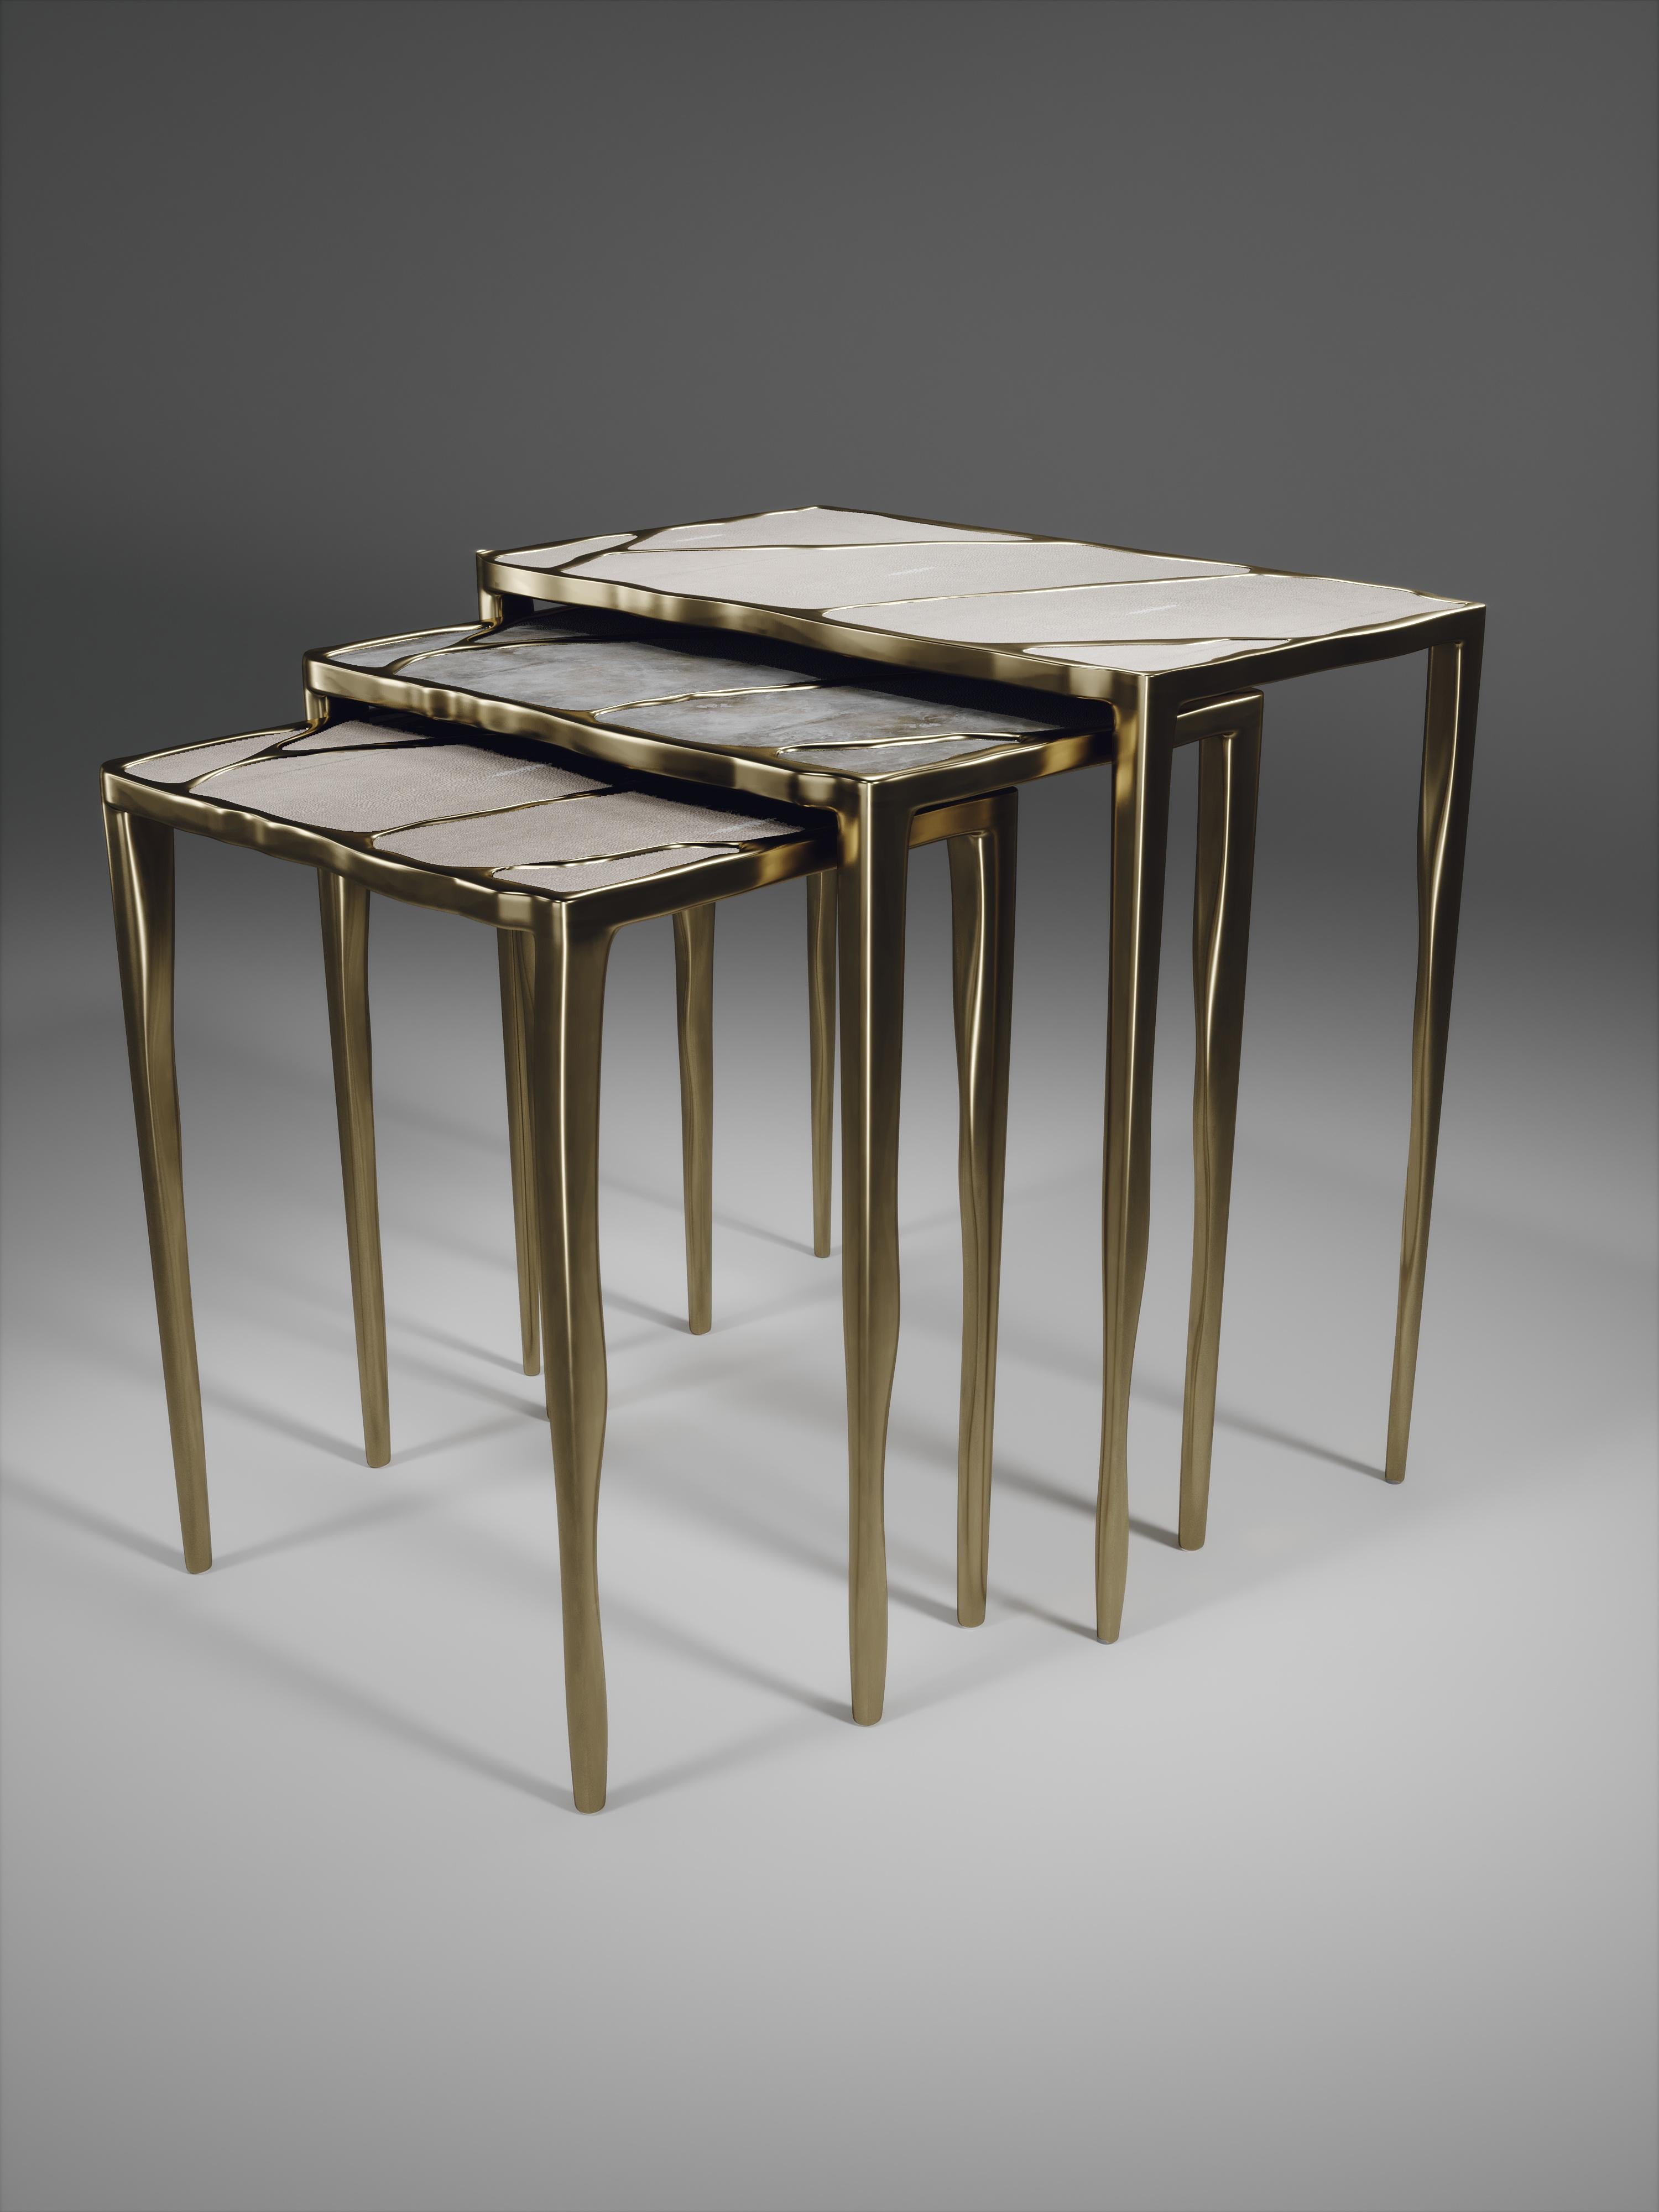 The Melting II nesting side table medium, is the perfect accent piece for any living space. These are sold either as a set of 3 to create elegant and geometric shapes, or individually. This listing is for the medium size only. The top is inlaid in